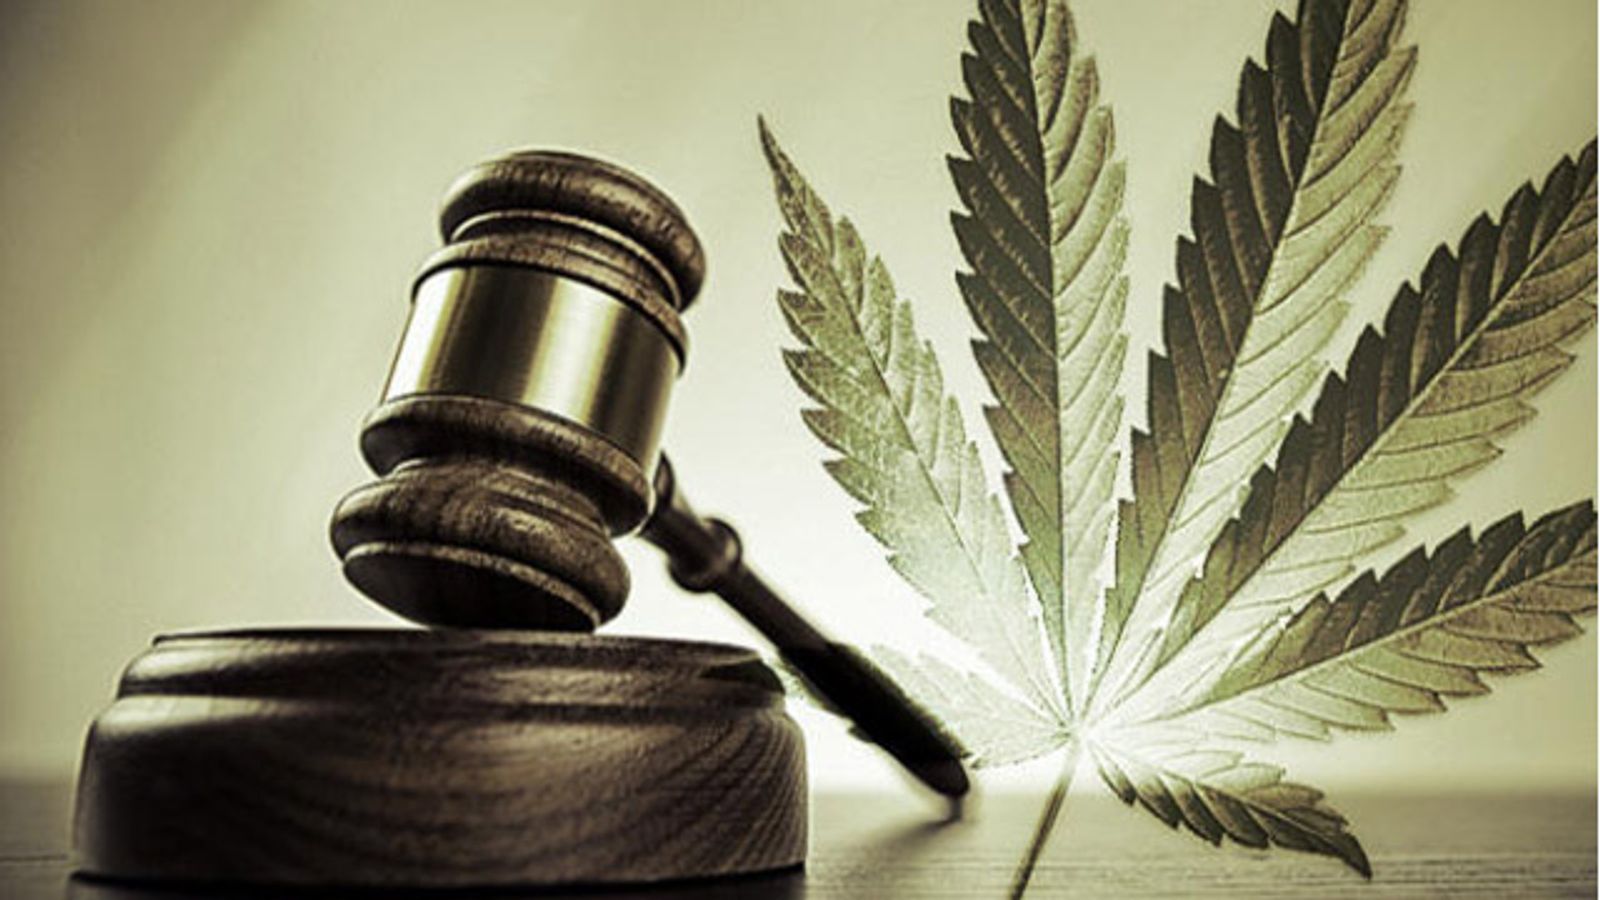 California Trial's Outcome Could Legalize Marijuana For All